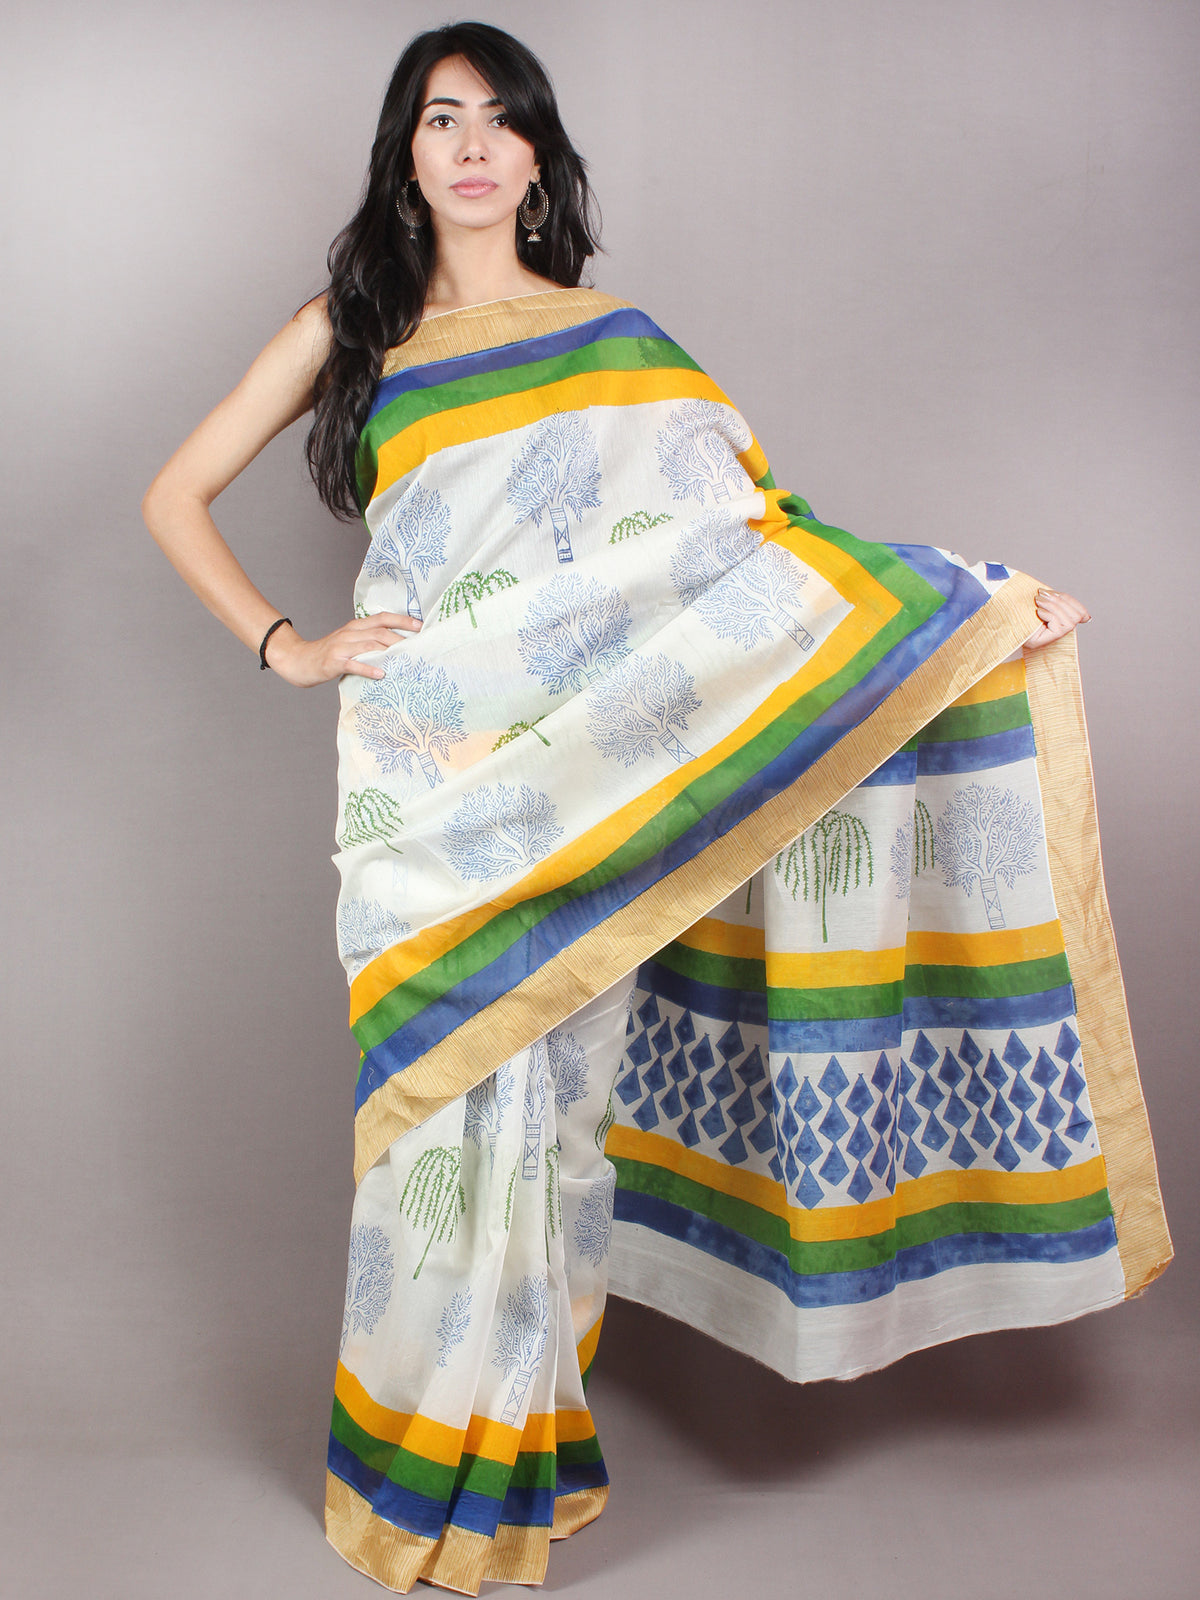 Ivory Yellow Blue Hand Block Printed in Natural Colors Chanderi Saree With Geecha Border - S03170686